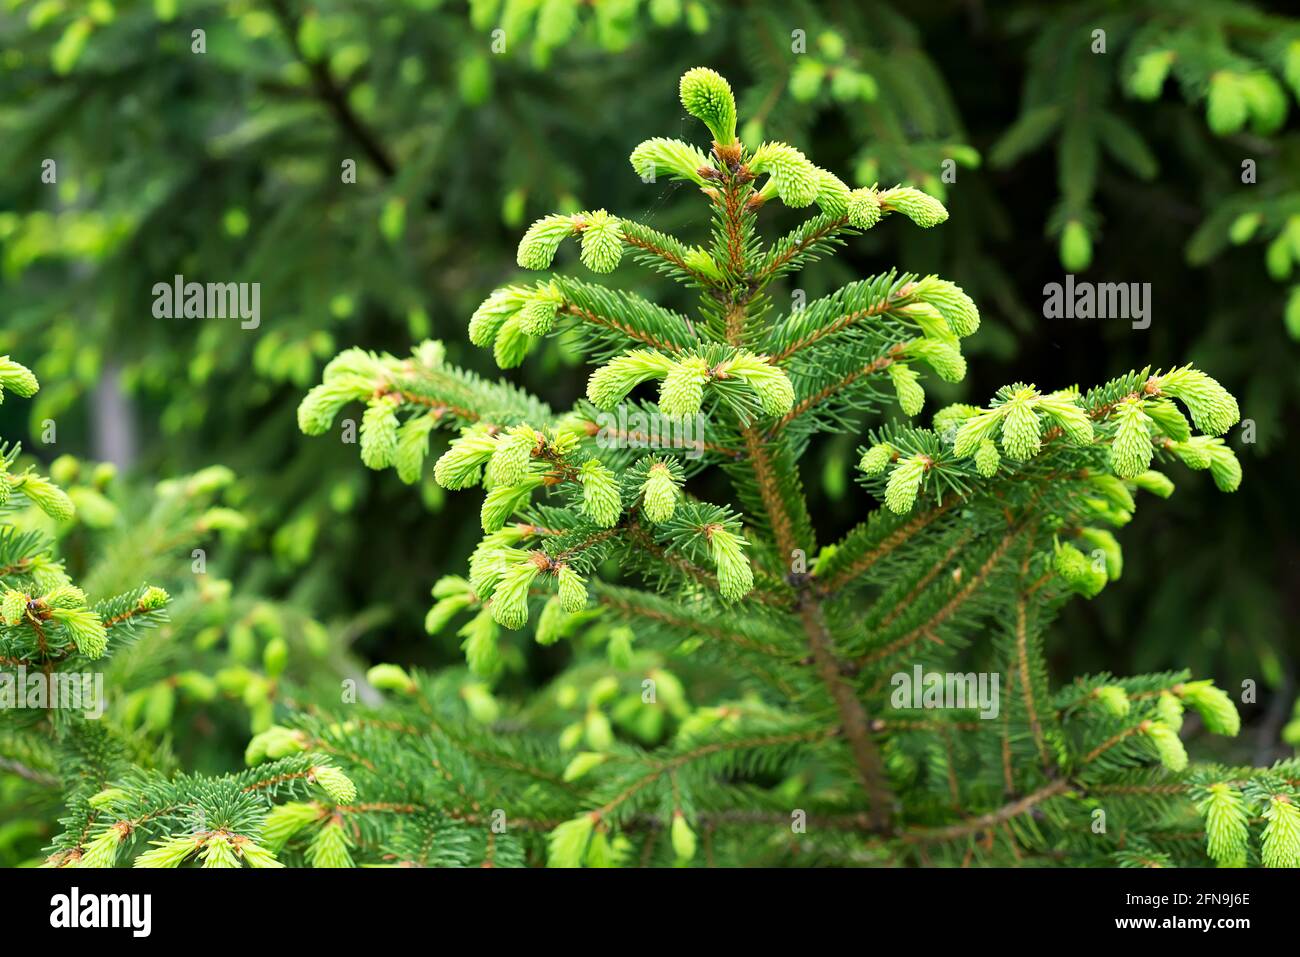 Fir bluish spruce Canadian, christmas spruce white - evergreen tree plant, species of the Pinaceae family. Light young shoots on dark green branches Stock Photo